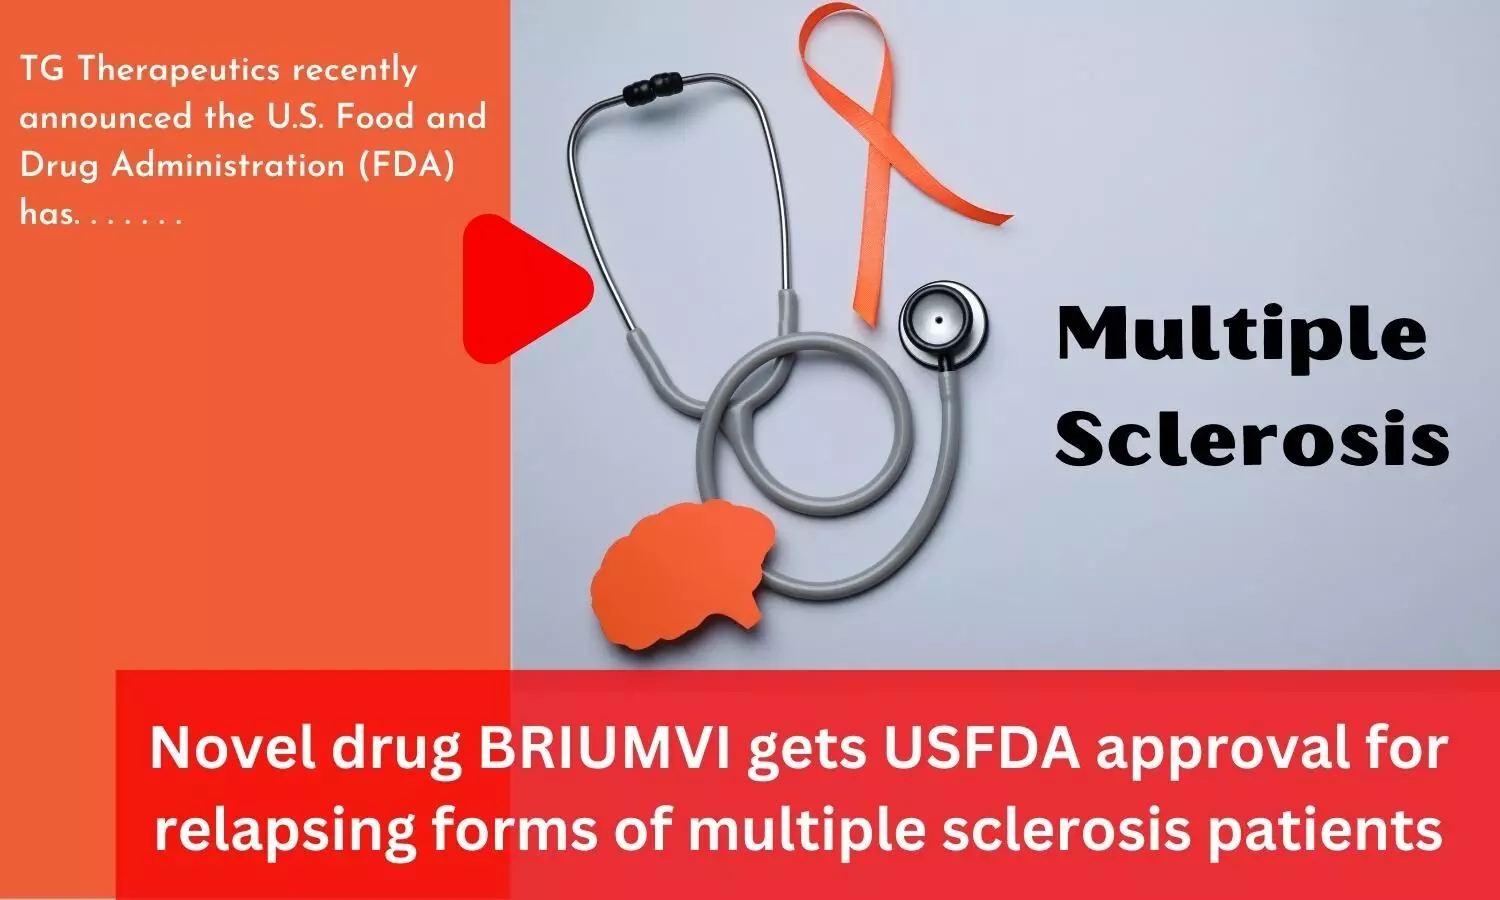 Based on ULTIMATE I & II trial results, novel drug BRIUMVI gets USFDA approval for relapsing forms of multiple sclerosis patients